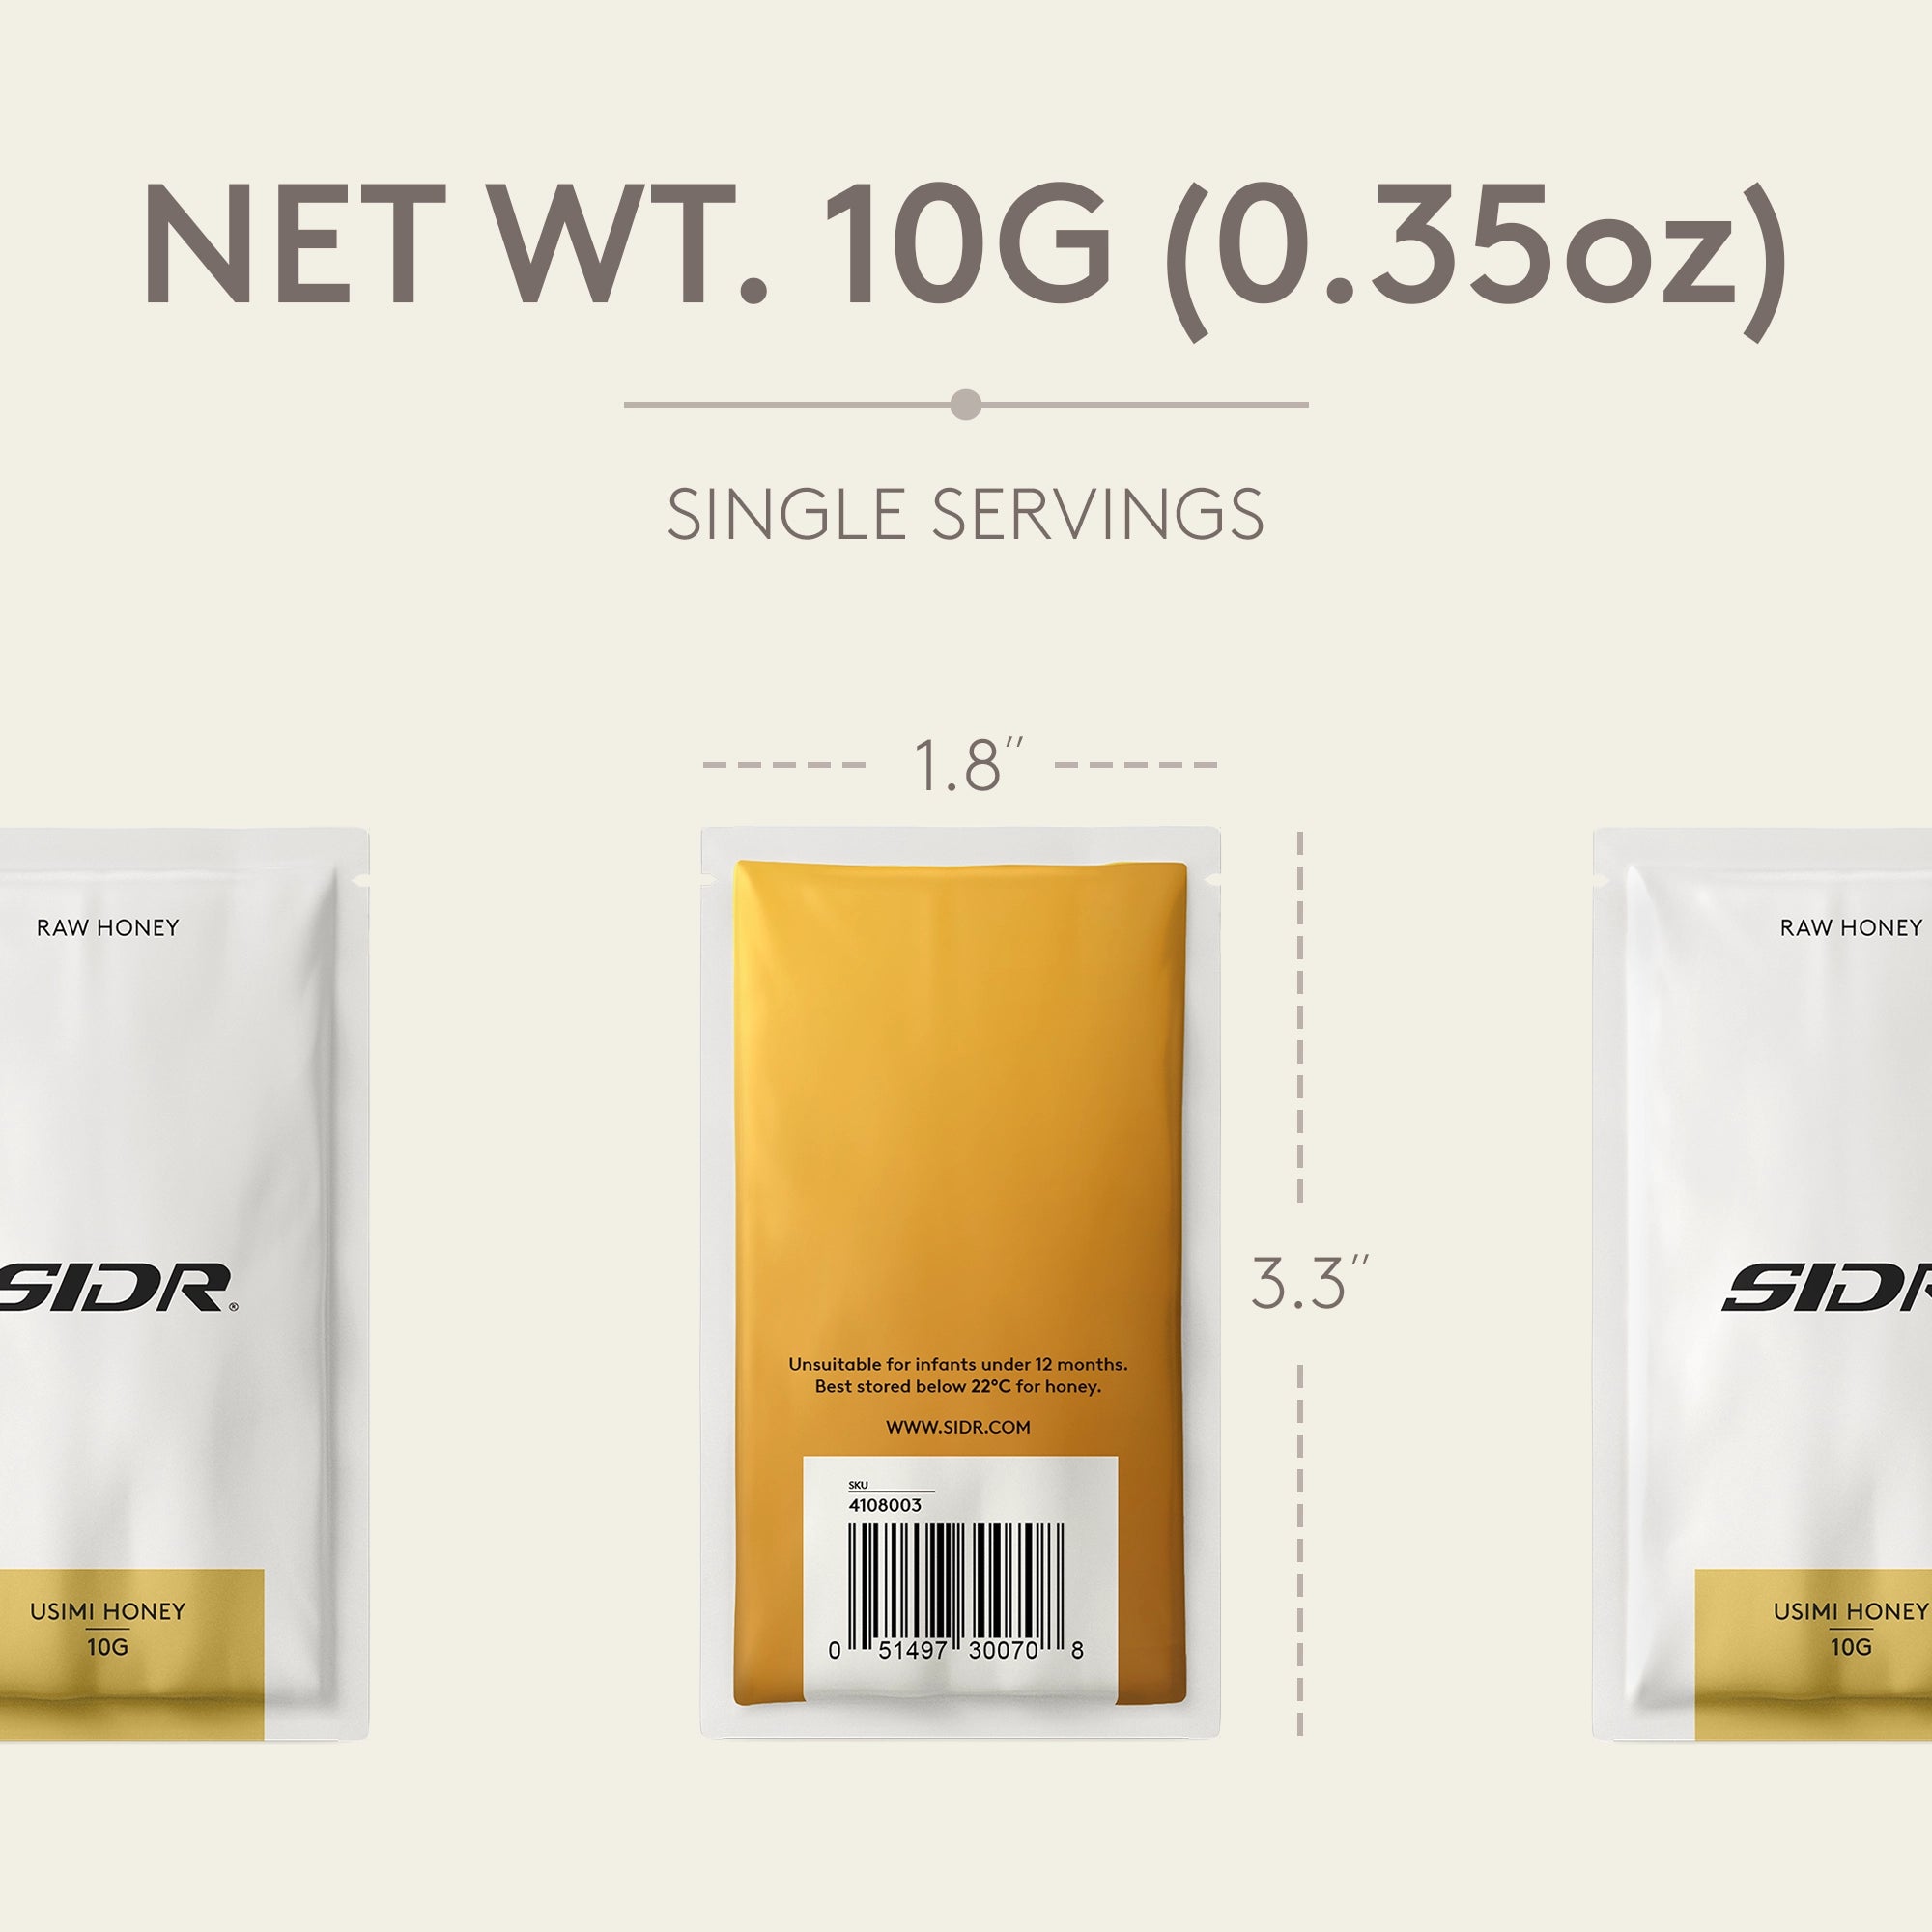 sidr usimi honey packet net weight